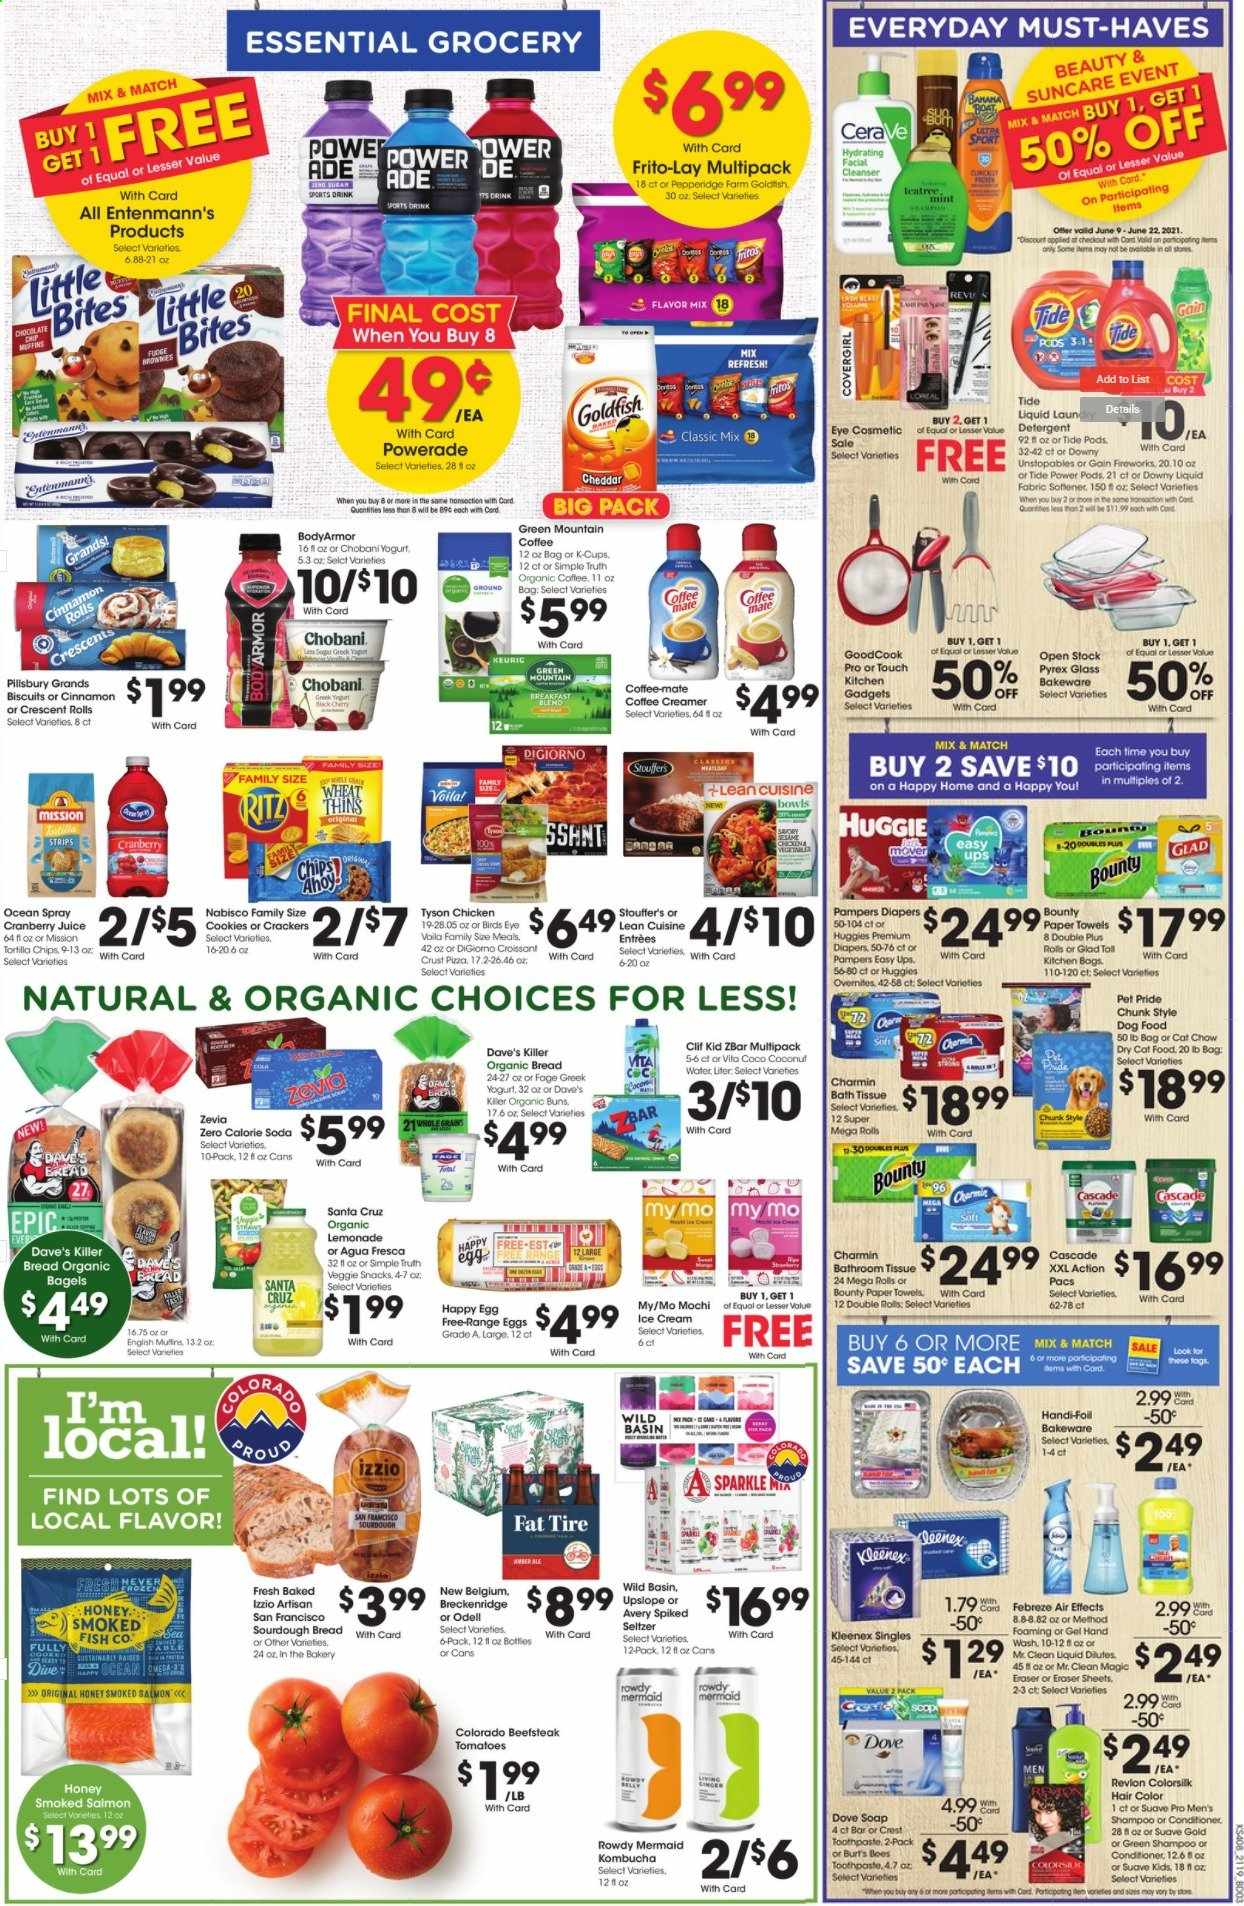 thumbnail - City Market Flyer - 06/09/2021 - 06/15/2021 - Sales products - bagels, bread, buns, sourdough bread, cinnamon roll, crescent rolls, Entenmann's, tomatoes, smoked salmon, fish, pizza, Pillsbury, Bird's Eye, Lean Cuisine, greek yoghurt, yoghurt, Chobani, Coffee-Mate, eggs, creamer, ice cream, strips, Stouffer's, cookies, fudge, snack, Bounty, crackers, biscuit, Little Bites, chips, Thins, Goldfish, Frito-Lay, honey, cranberry juice, lemonade, Powerade, soda, juice, coconut water, kombucha, organic coffee, coffee capsules, K-Cups, breakfast blend, Green Mountain, Huggies, Pampers, nappies, Dove, bath tissue, Kleenex, kitchen towels, paper towels, Charmin, detergent, Febreze, Gain, Cascade, Tide, Unstopables, fabric softener, Gain Fireworks, Downy Laundry, shampoo, Suave, hand wash, soap, toothpaste, Crest, CeraVe, cleanser, conditioner, Revlon, hair color, bakeware, Pyrex, eraser, animal food, cat food, dog food, dry cat food. Page 6.